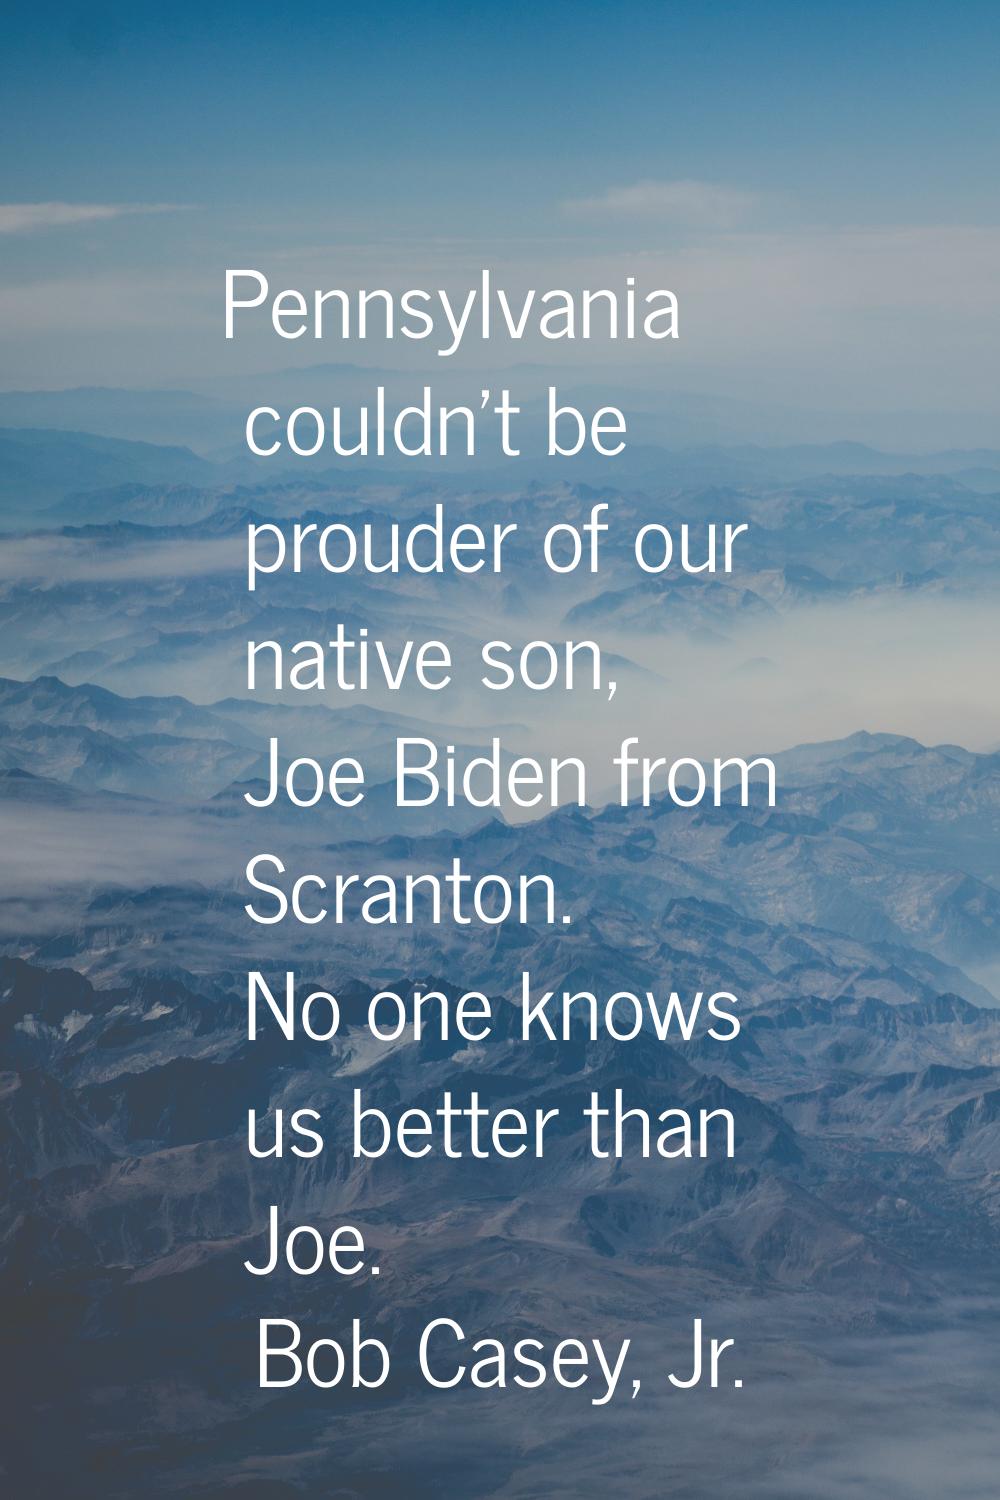 Pennsylvania couldn't be prouder of our native son, Joe Biden from Scranton. No one knows us better